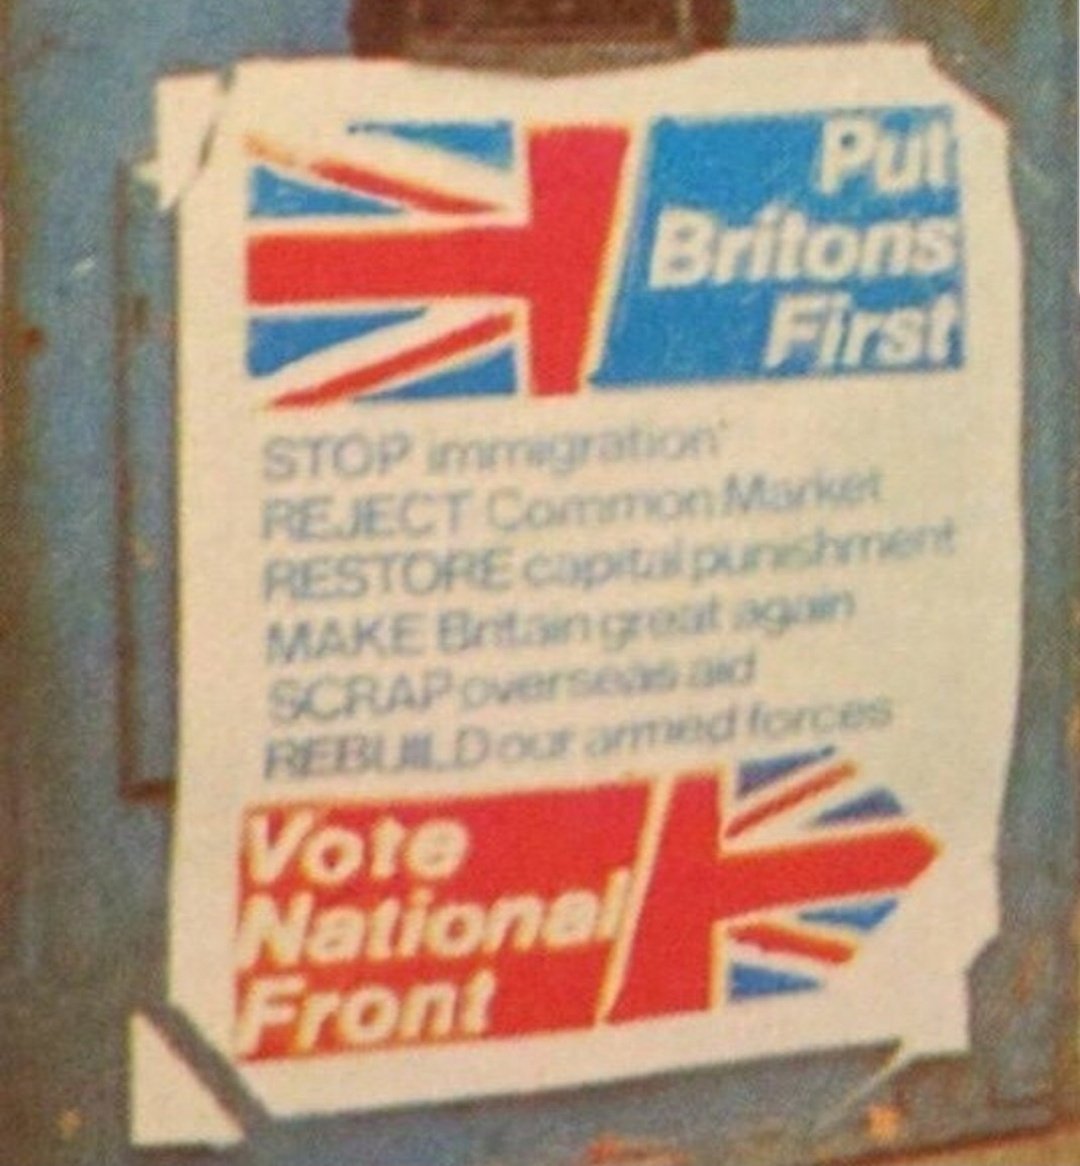 National Front poster from 1970. Familiar huh.